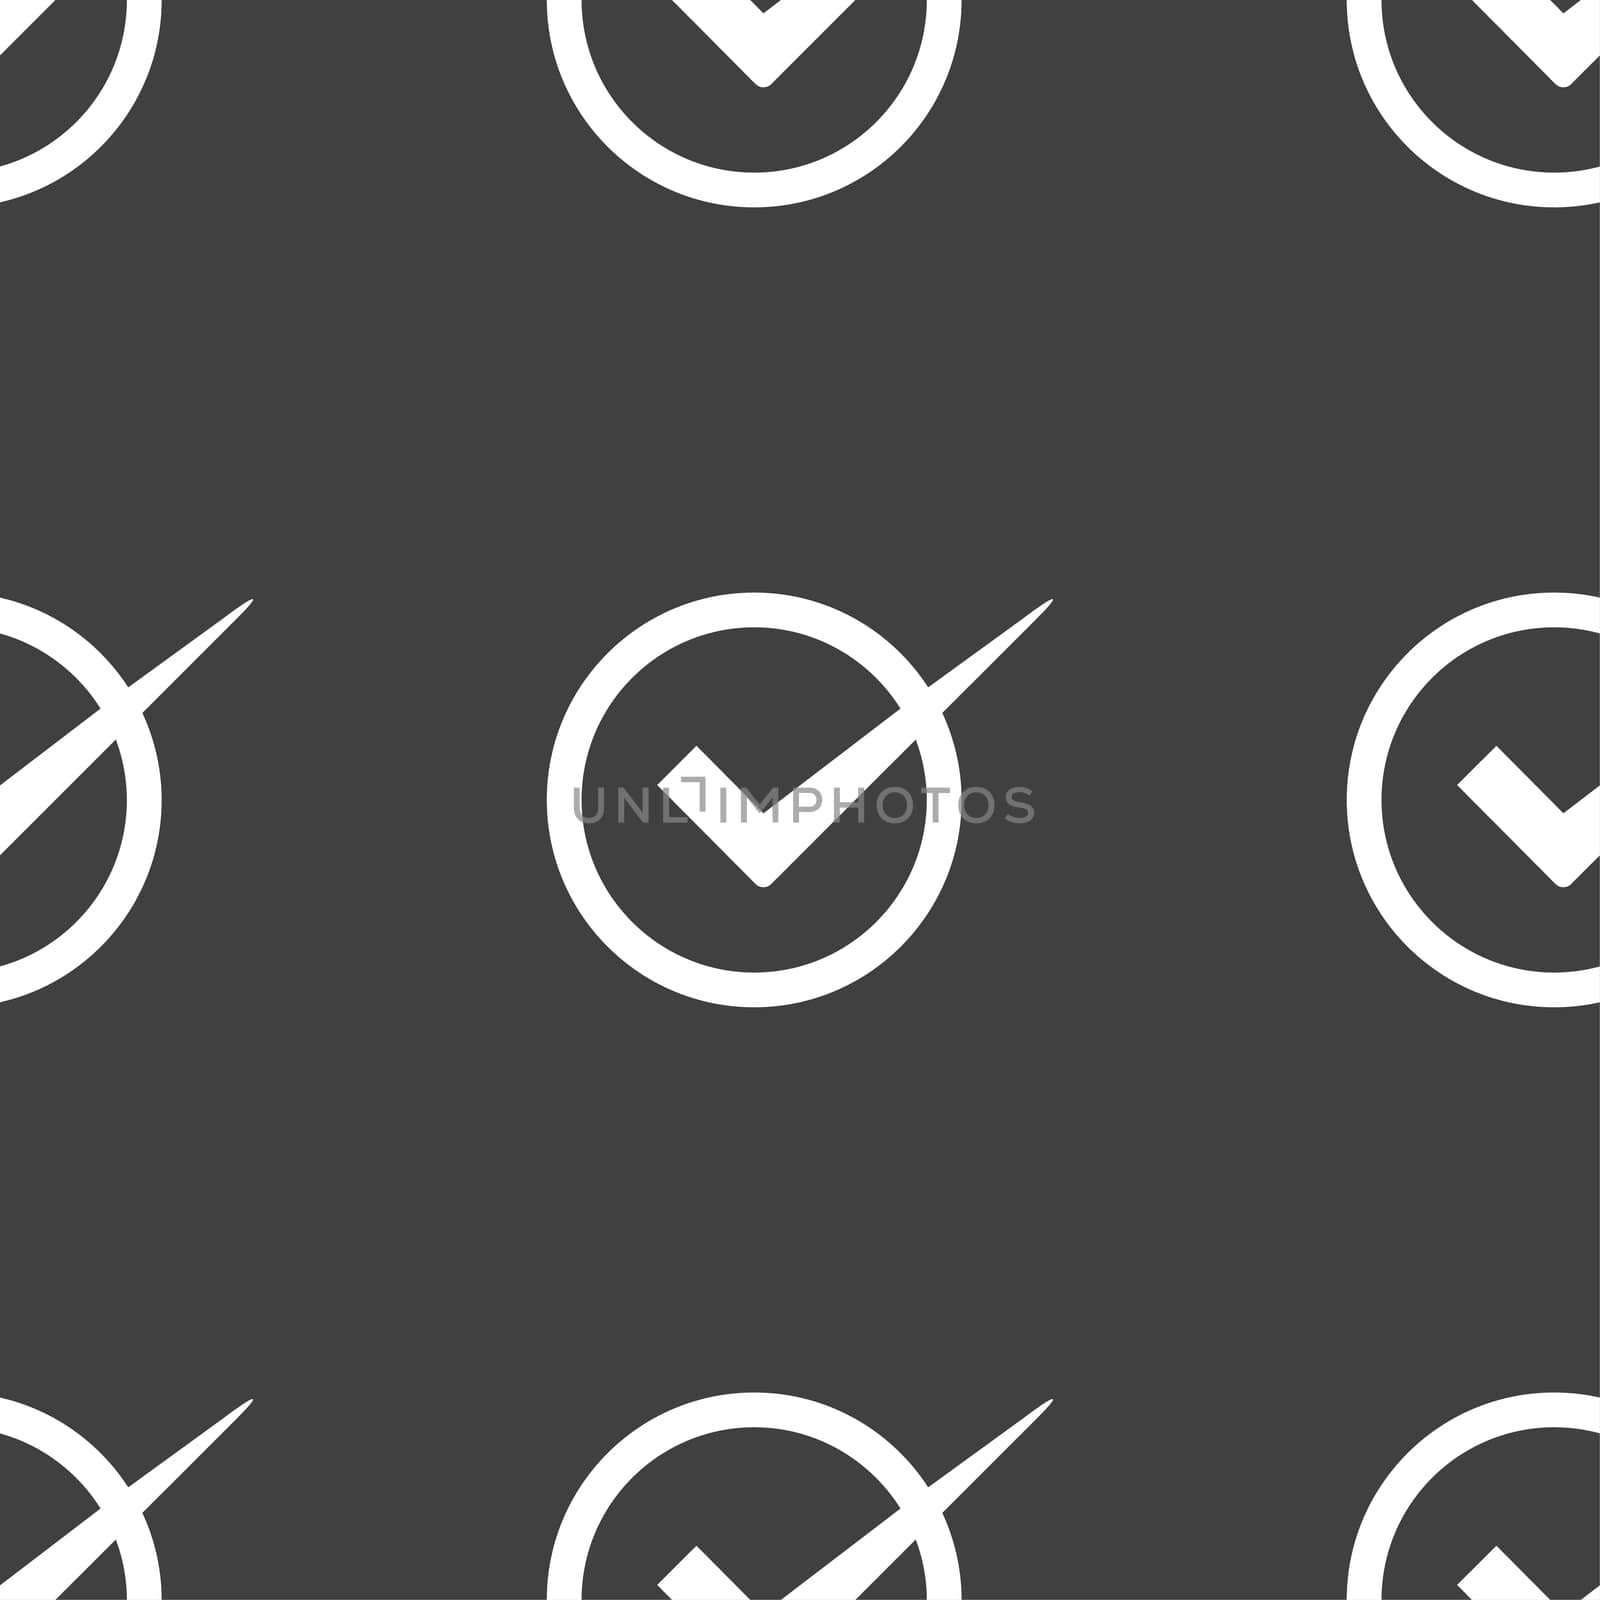 Check mark sign icon. Checkbox button. Seamless pattern on a gray background. illustration